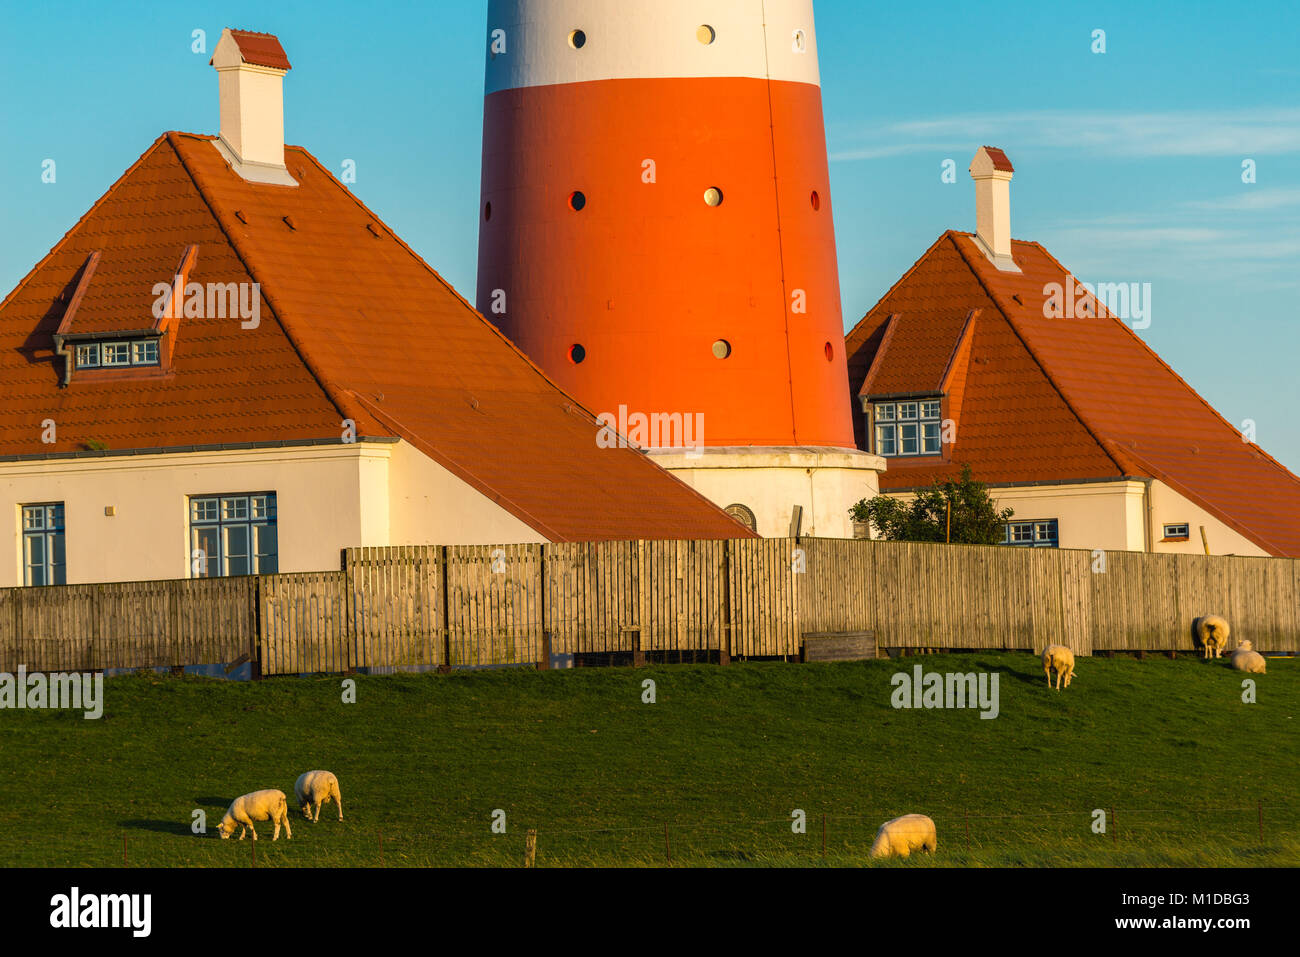 Germany´s most famous lighthouse Westerheversand in the salt marshes of the North Sea,  Westerhever, North Frisia, Schleswig-Holstein, Germany, Europe Stock Photo